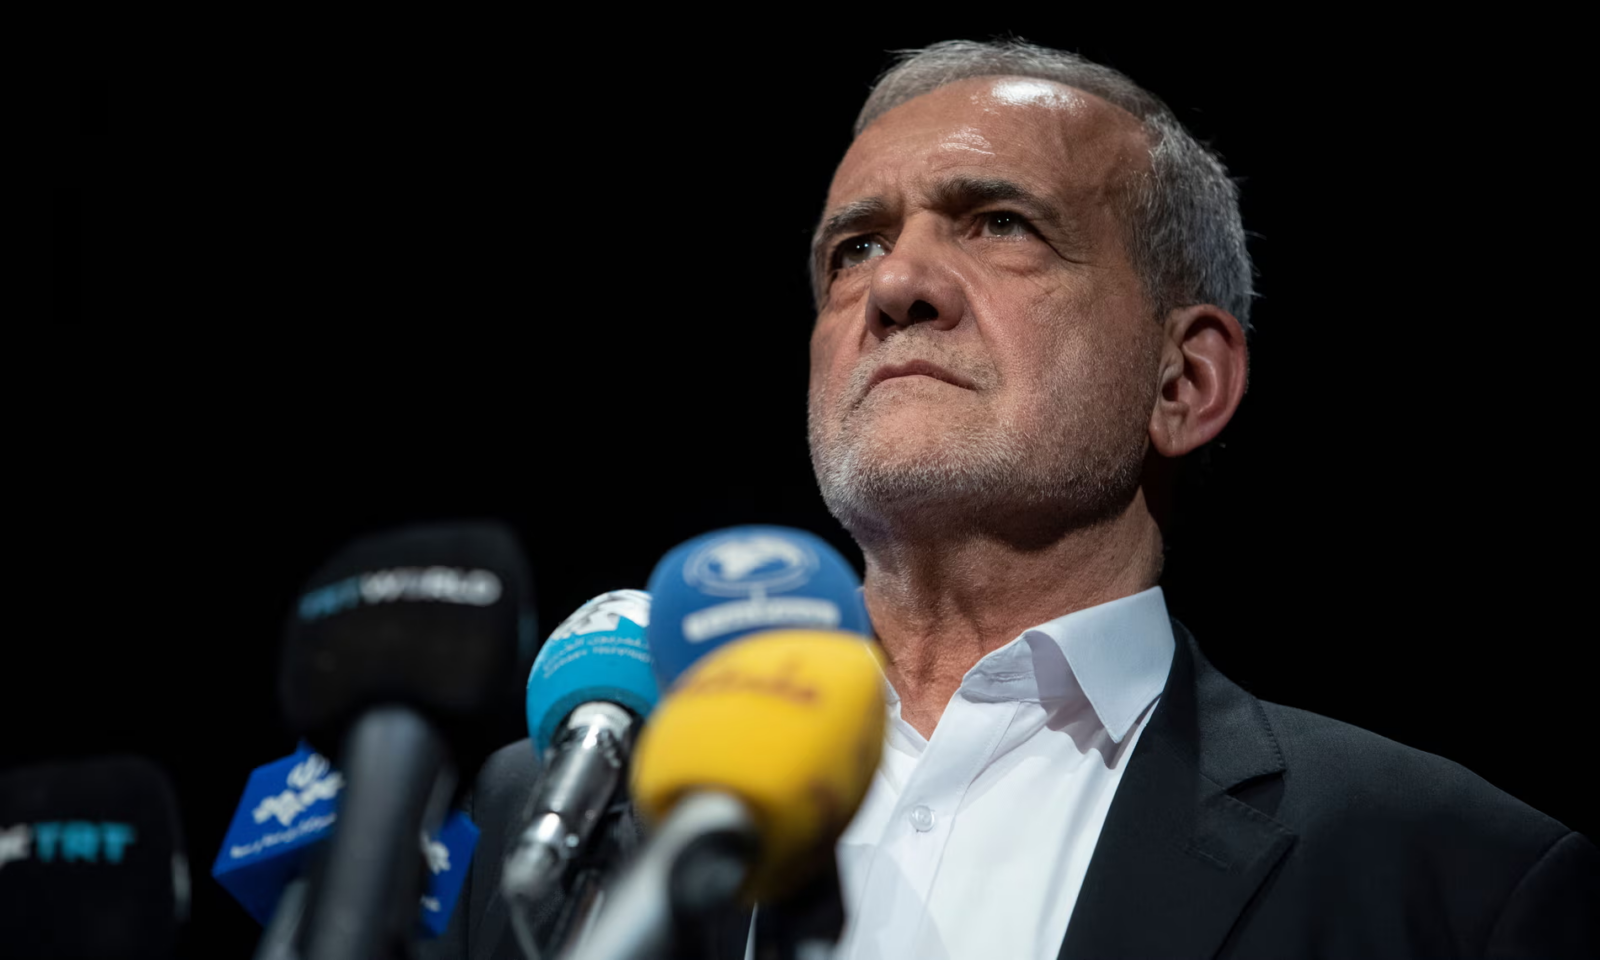 Support for Pezeshkian: A desire to see a Turk win Iranian presidency